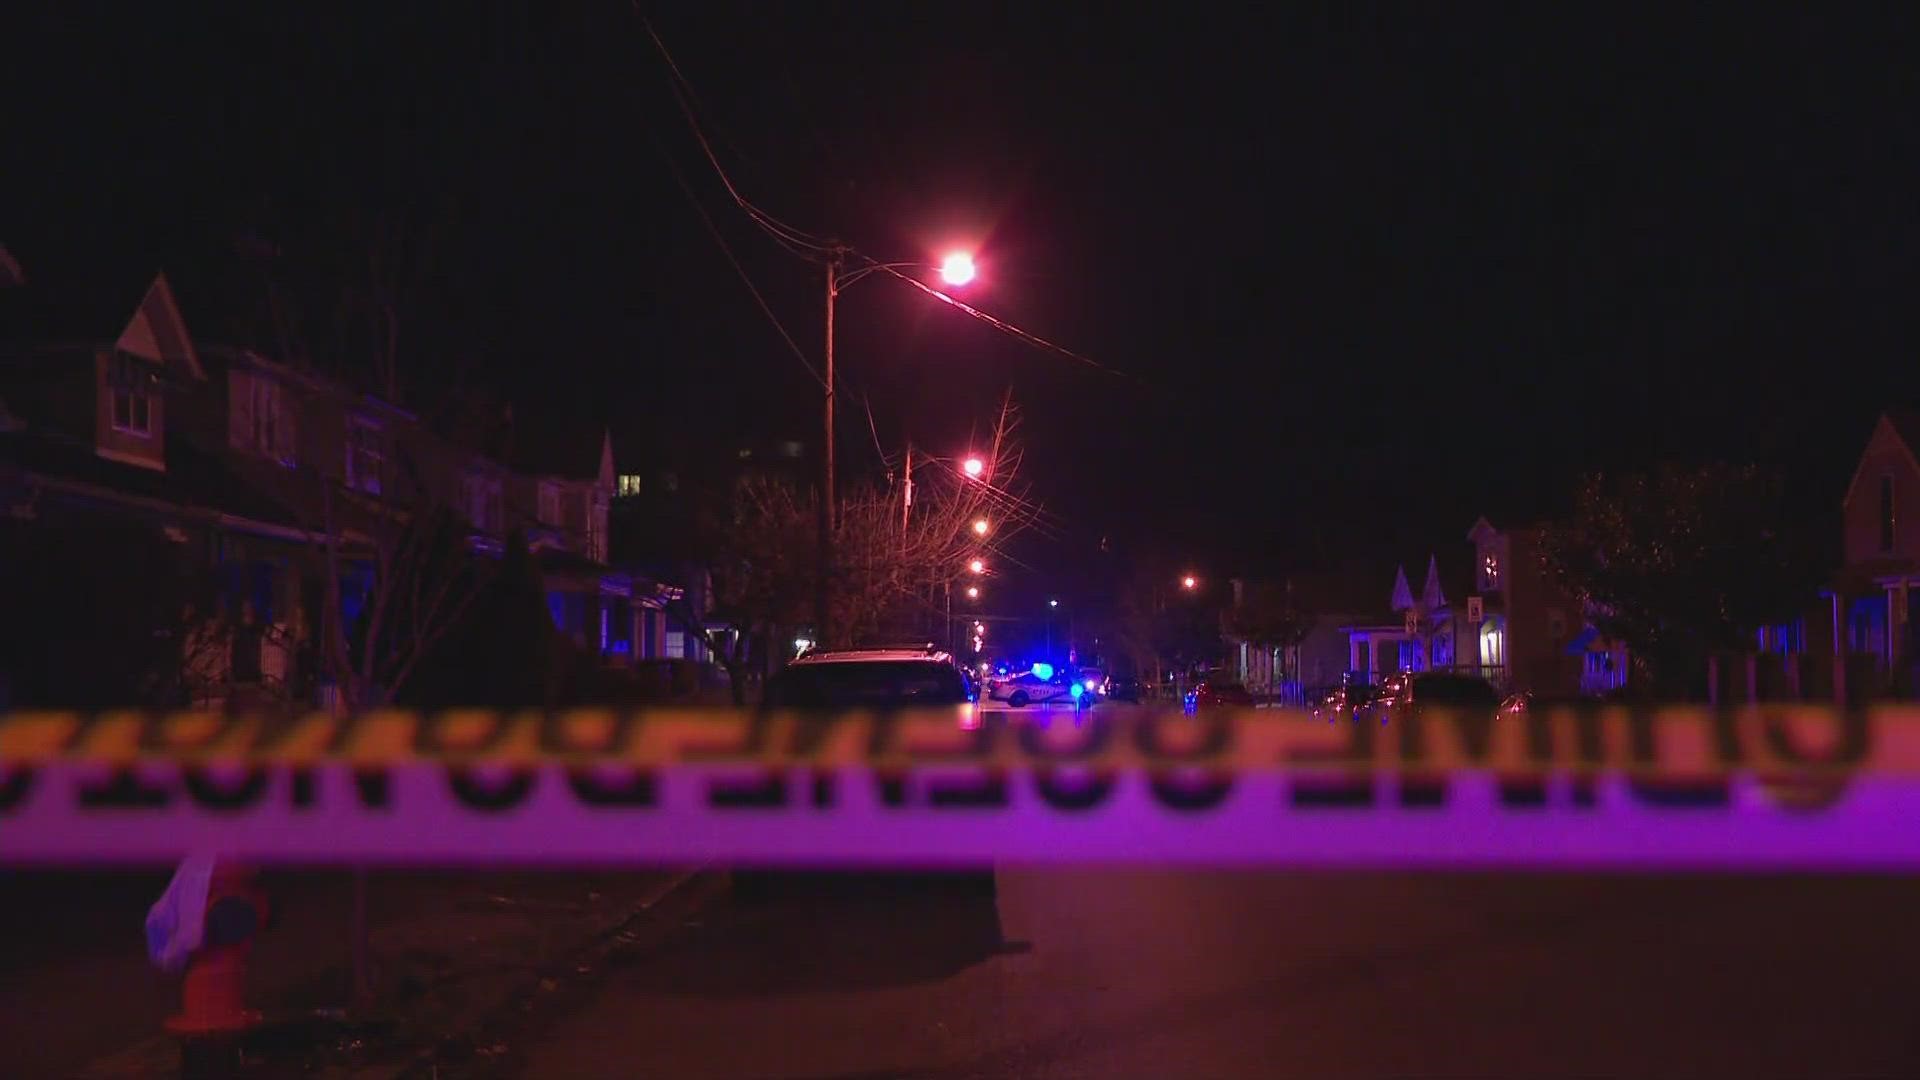 Police said shortly before 9:30 p.m. they got a call of a shooting in the 2500 block of West Madison Street.